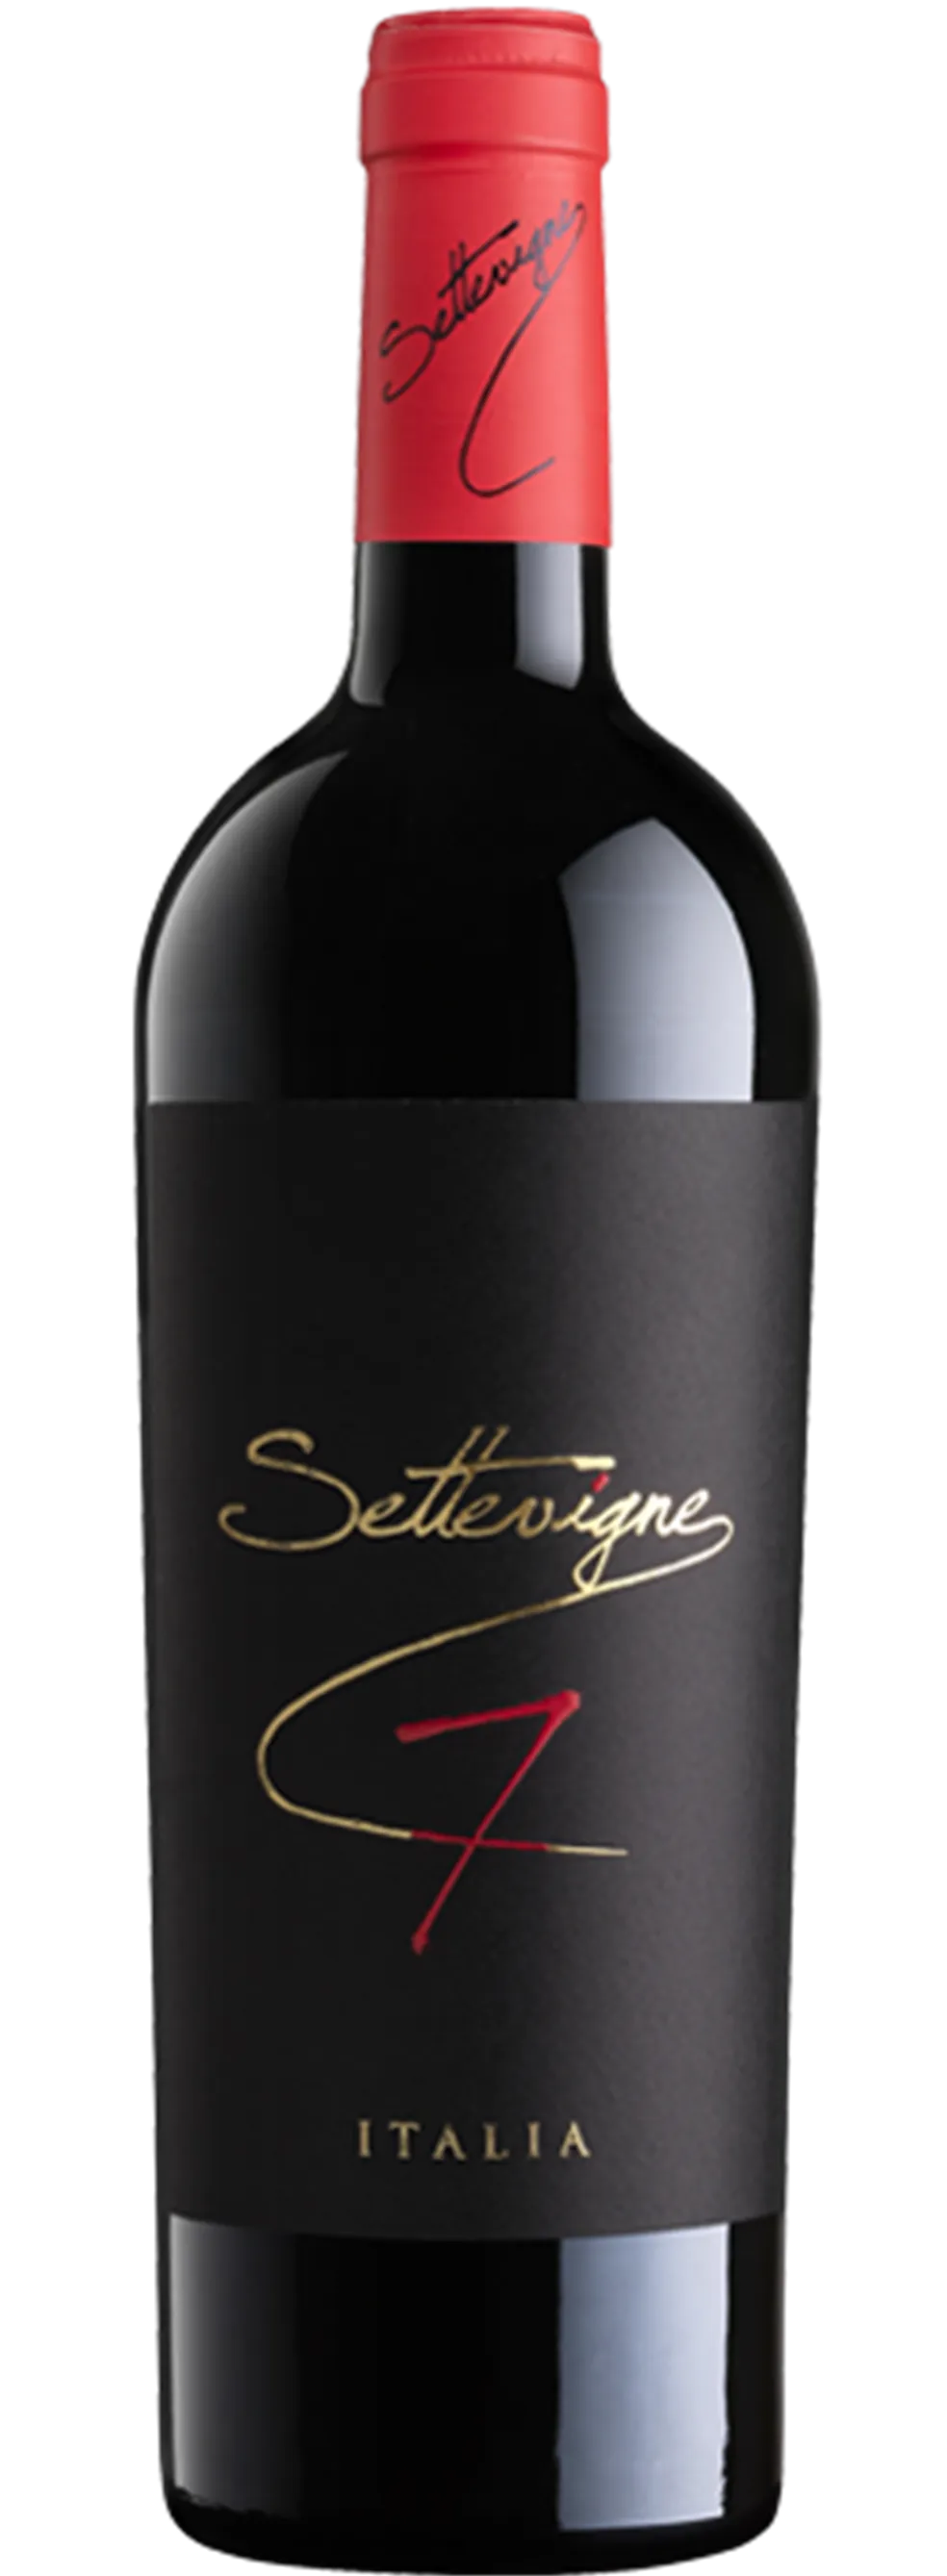 Bottle of Sette Vigne Rosso from search results